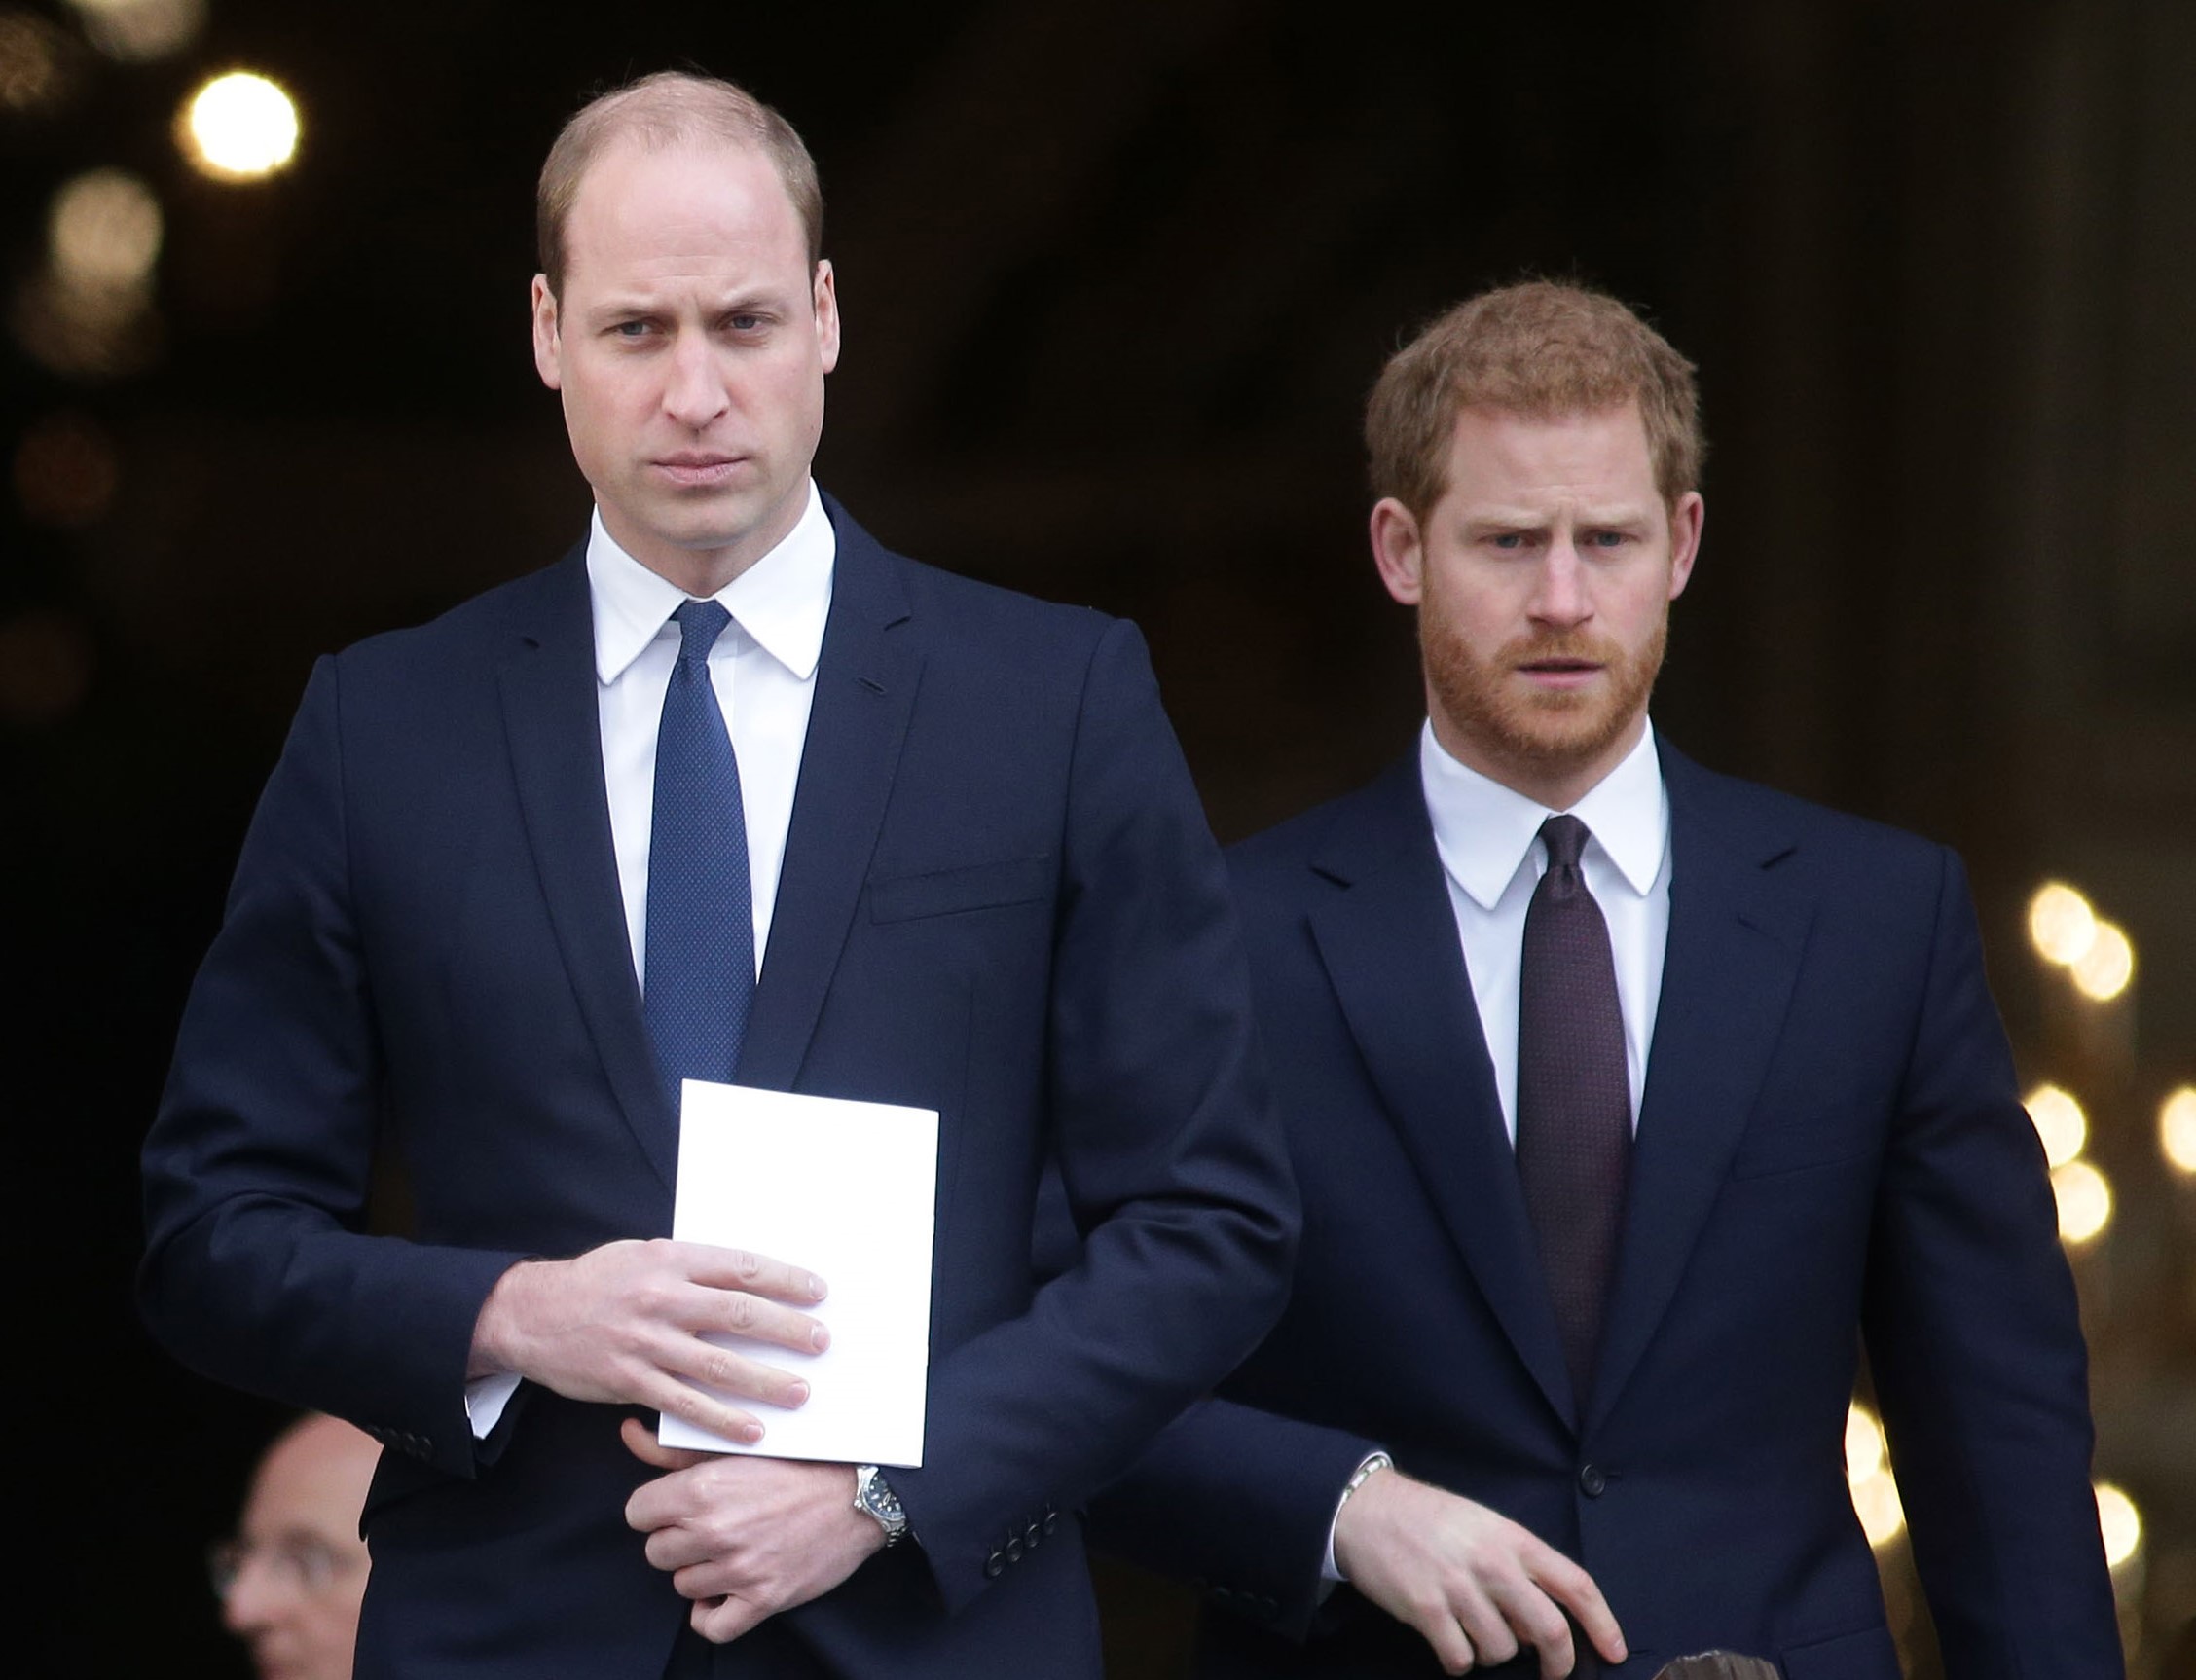 Prince William, who will have to break the queen's rule to handle his brother, Prince Harry, leave after attending the Grenfell Tower National Memorial Service